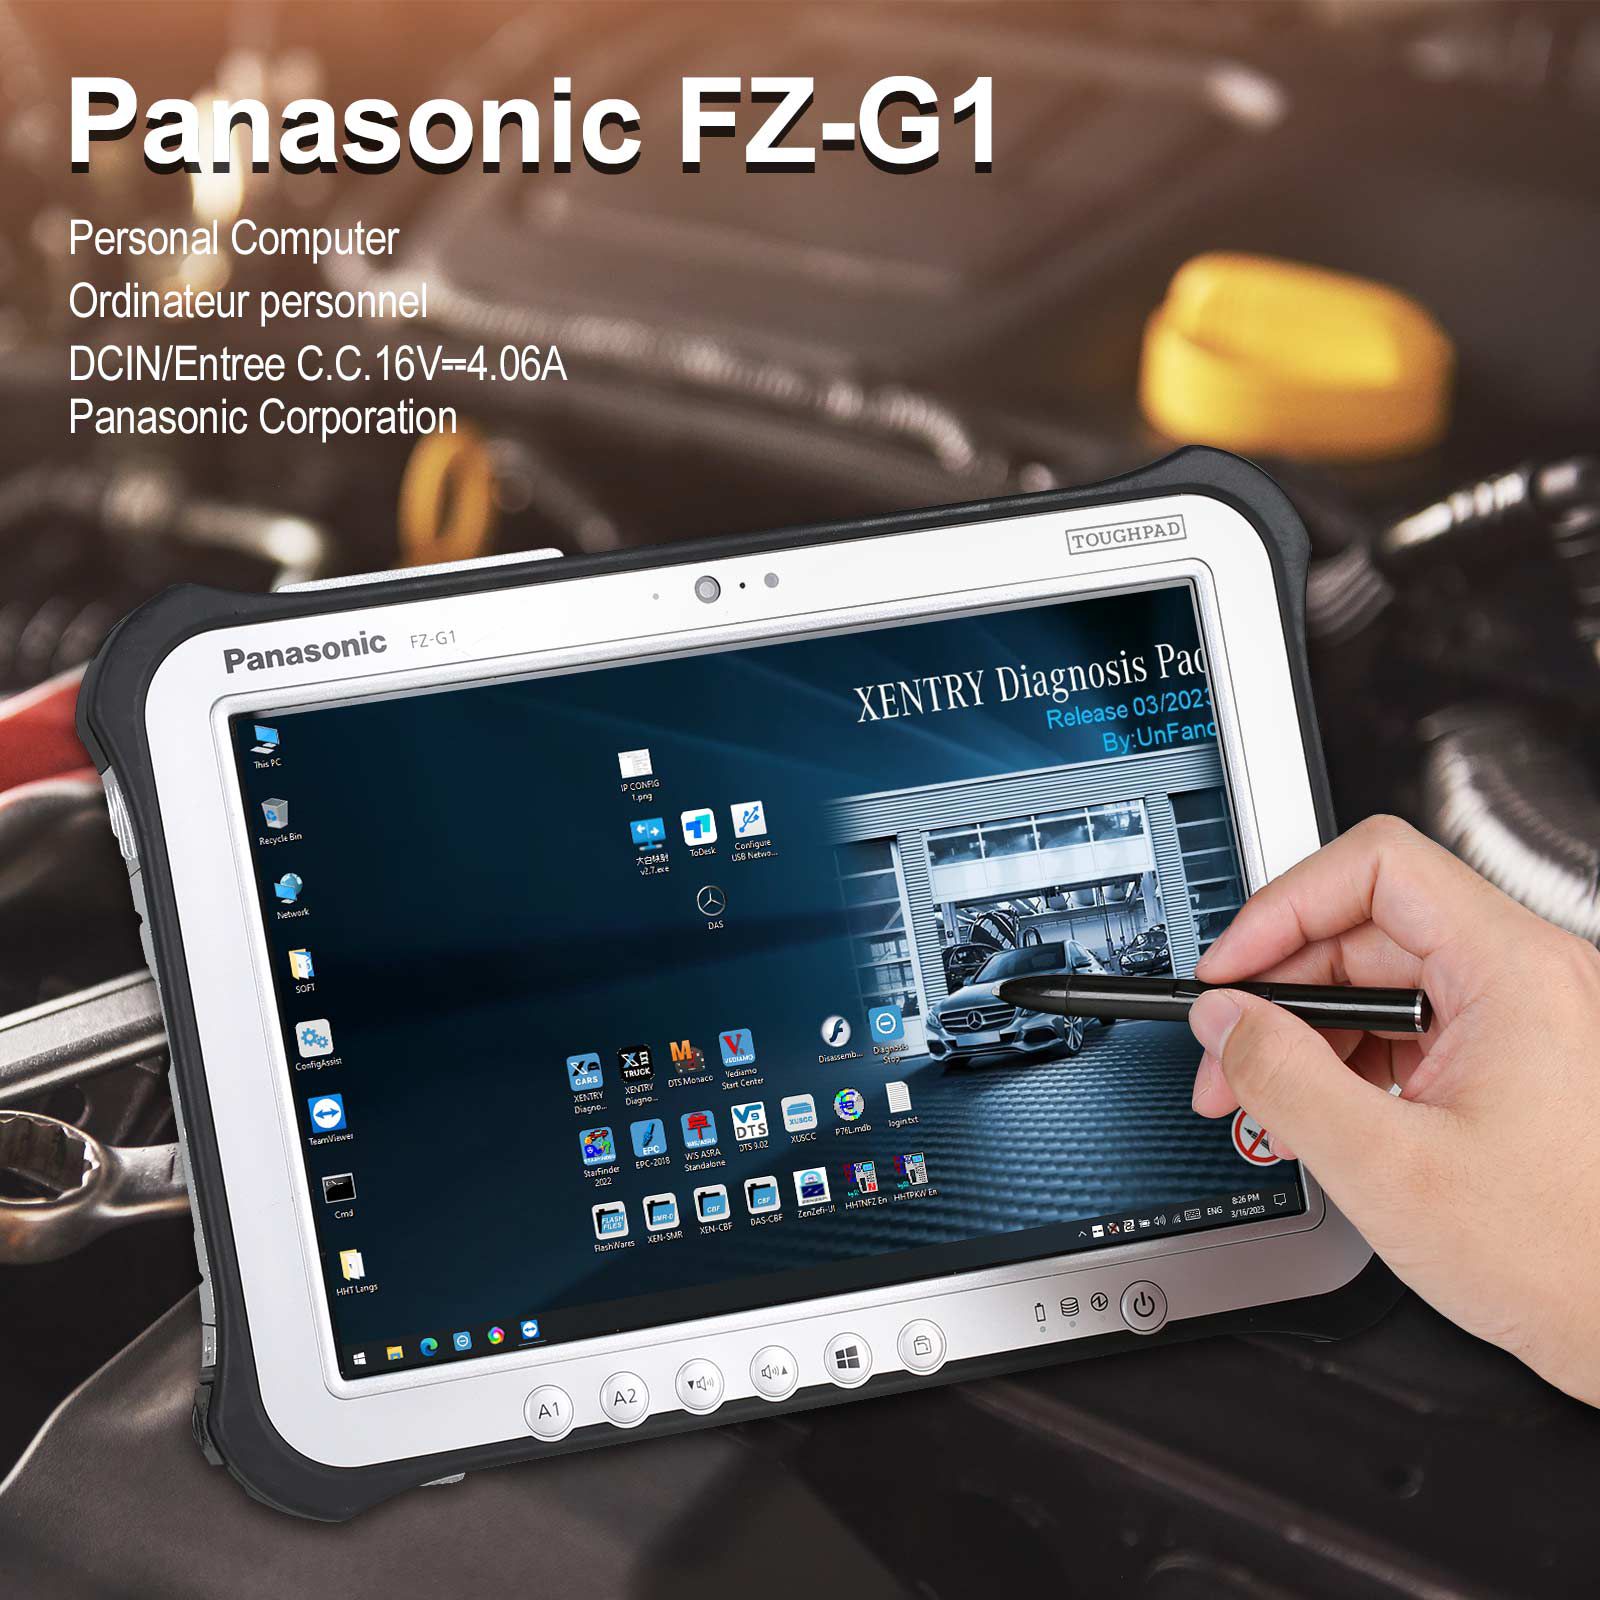 100% Original Panasonic FZ-G1 I5 3rd Generation Tablet 8G with V2023.3 MB Star 256G SSD WIN10 64Bit Installed Ready to Use